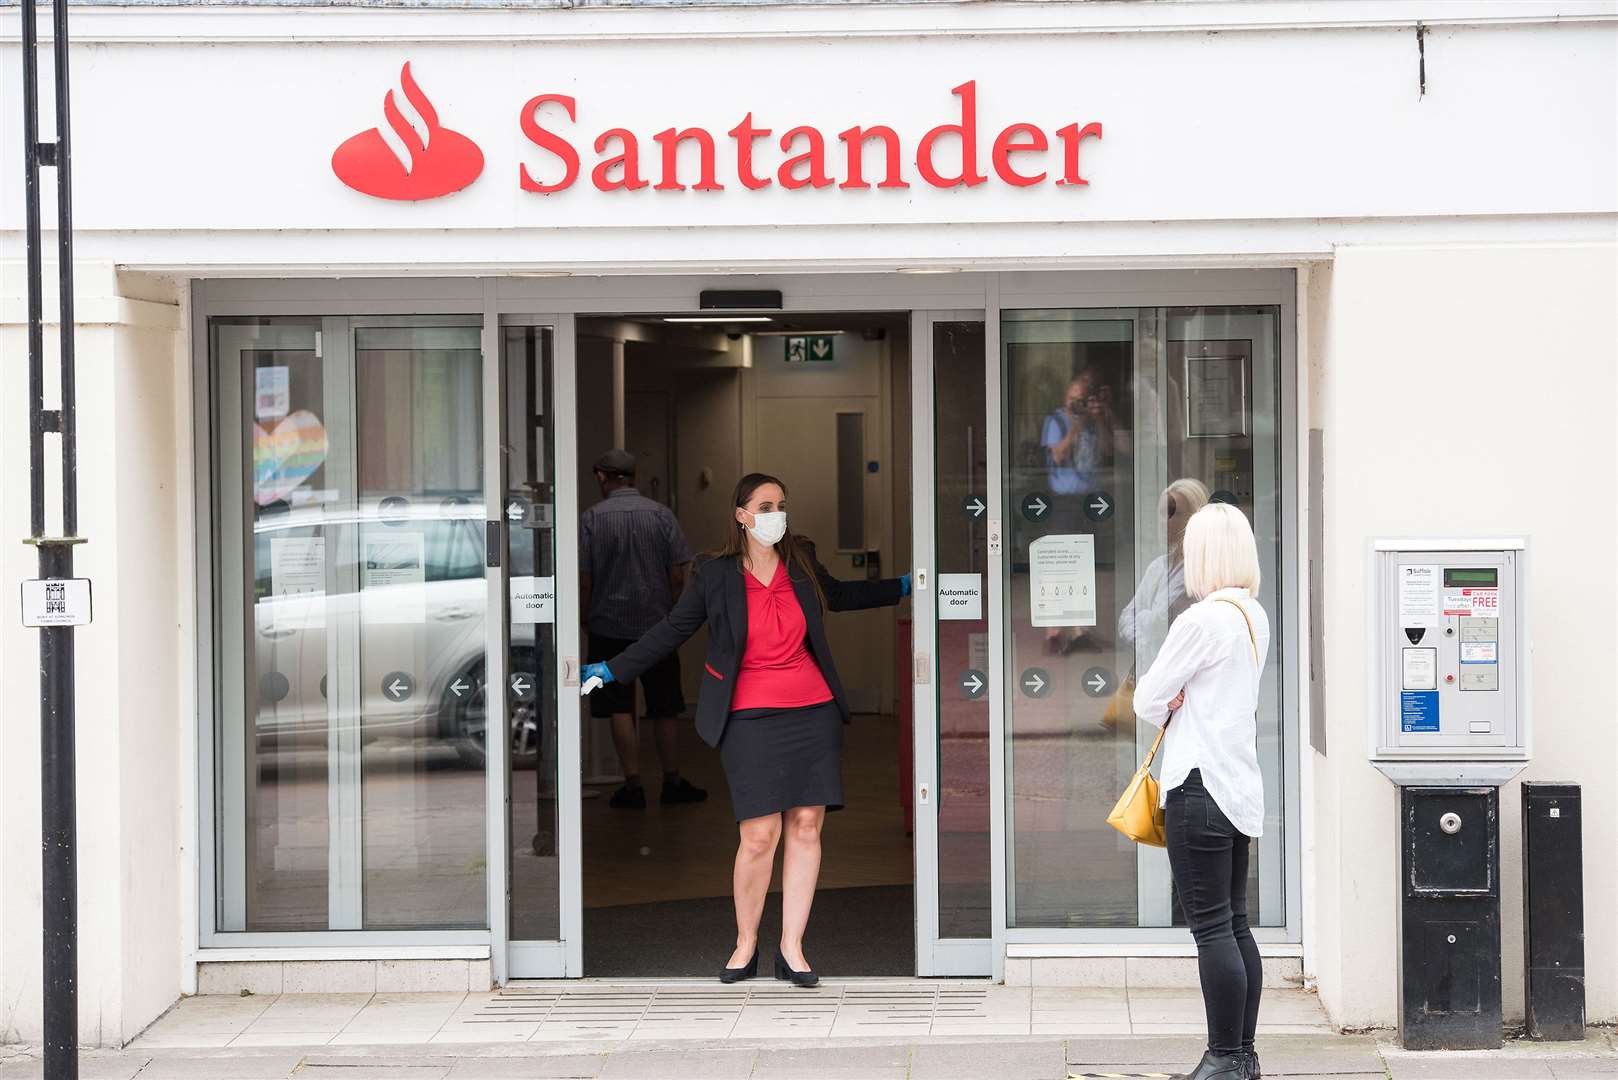 The pandemic has changed the way people bank